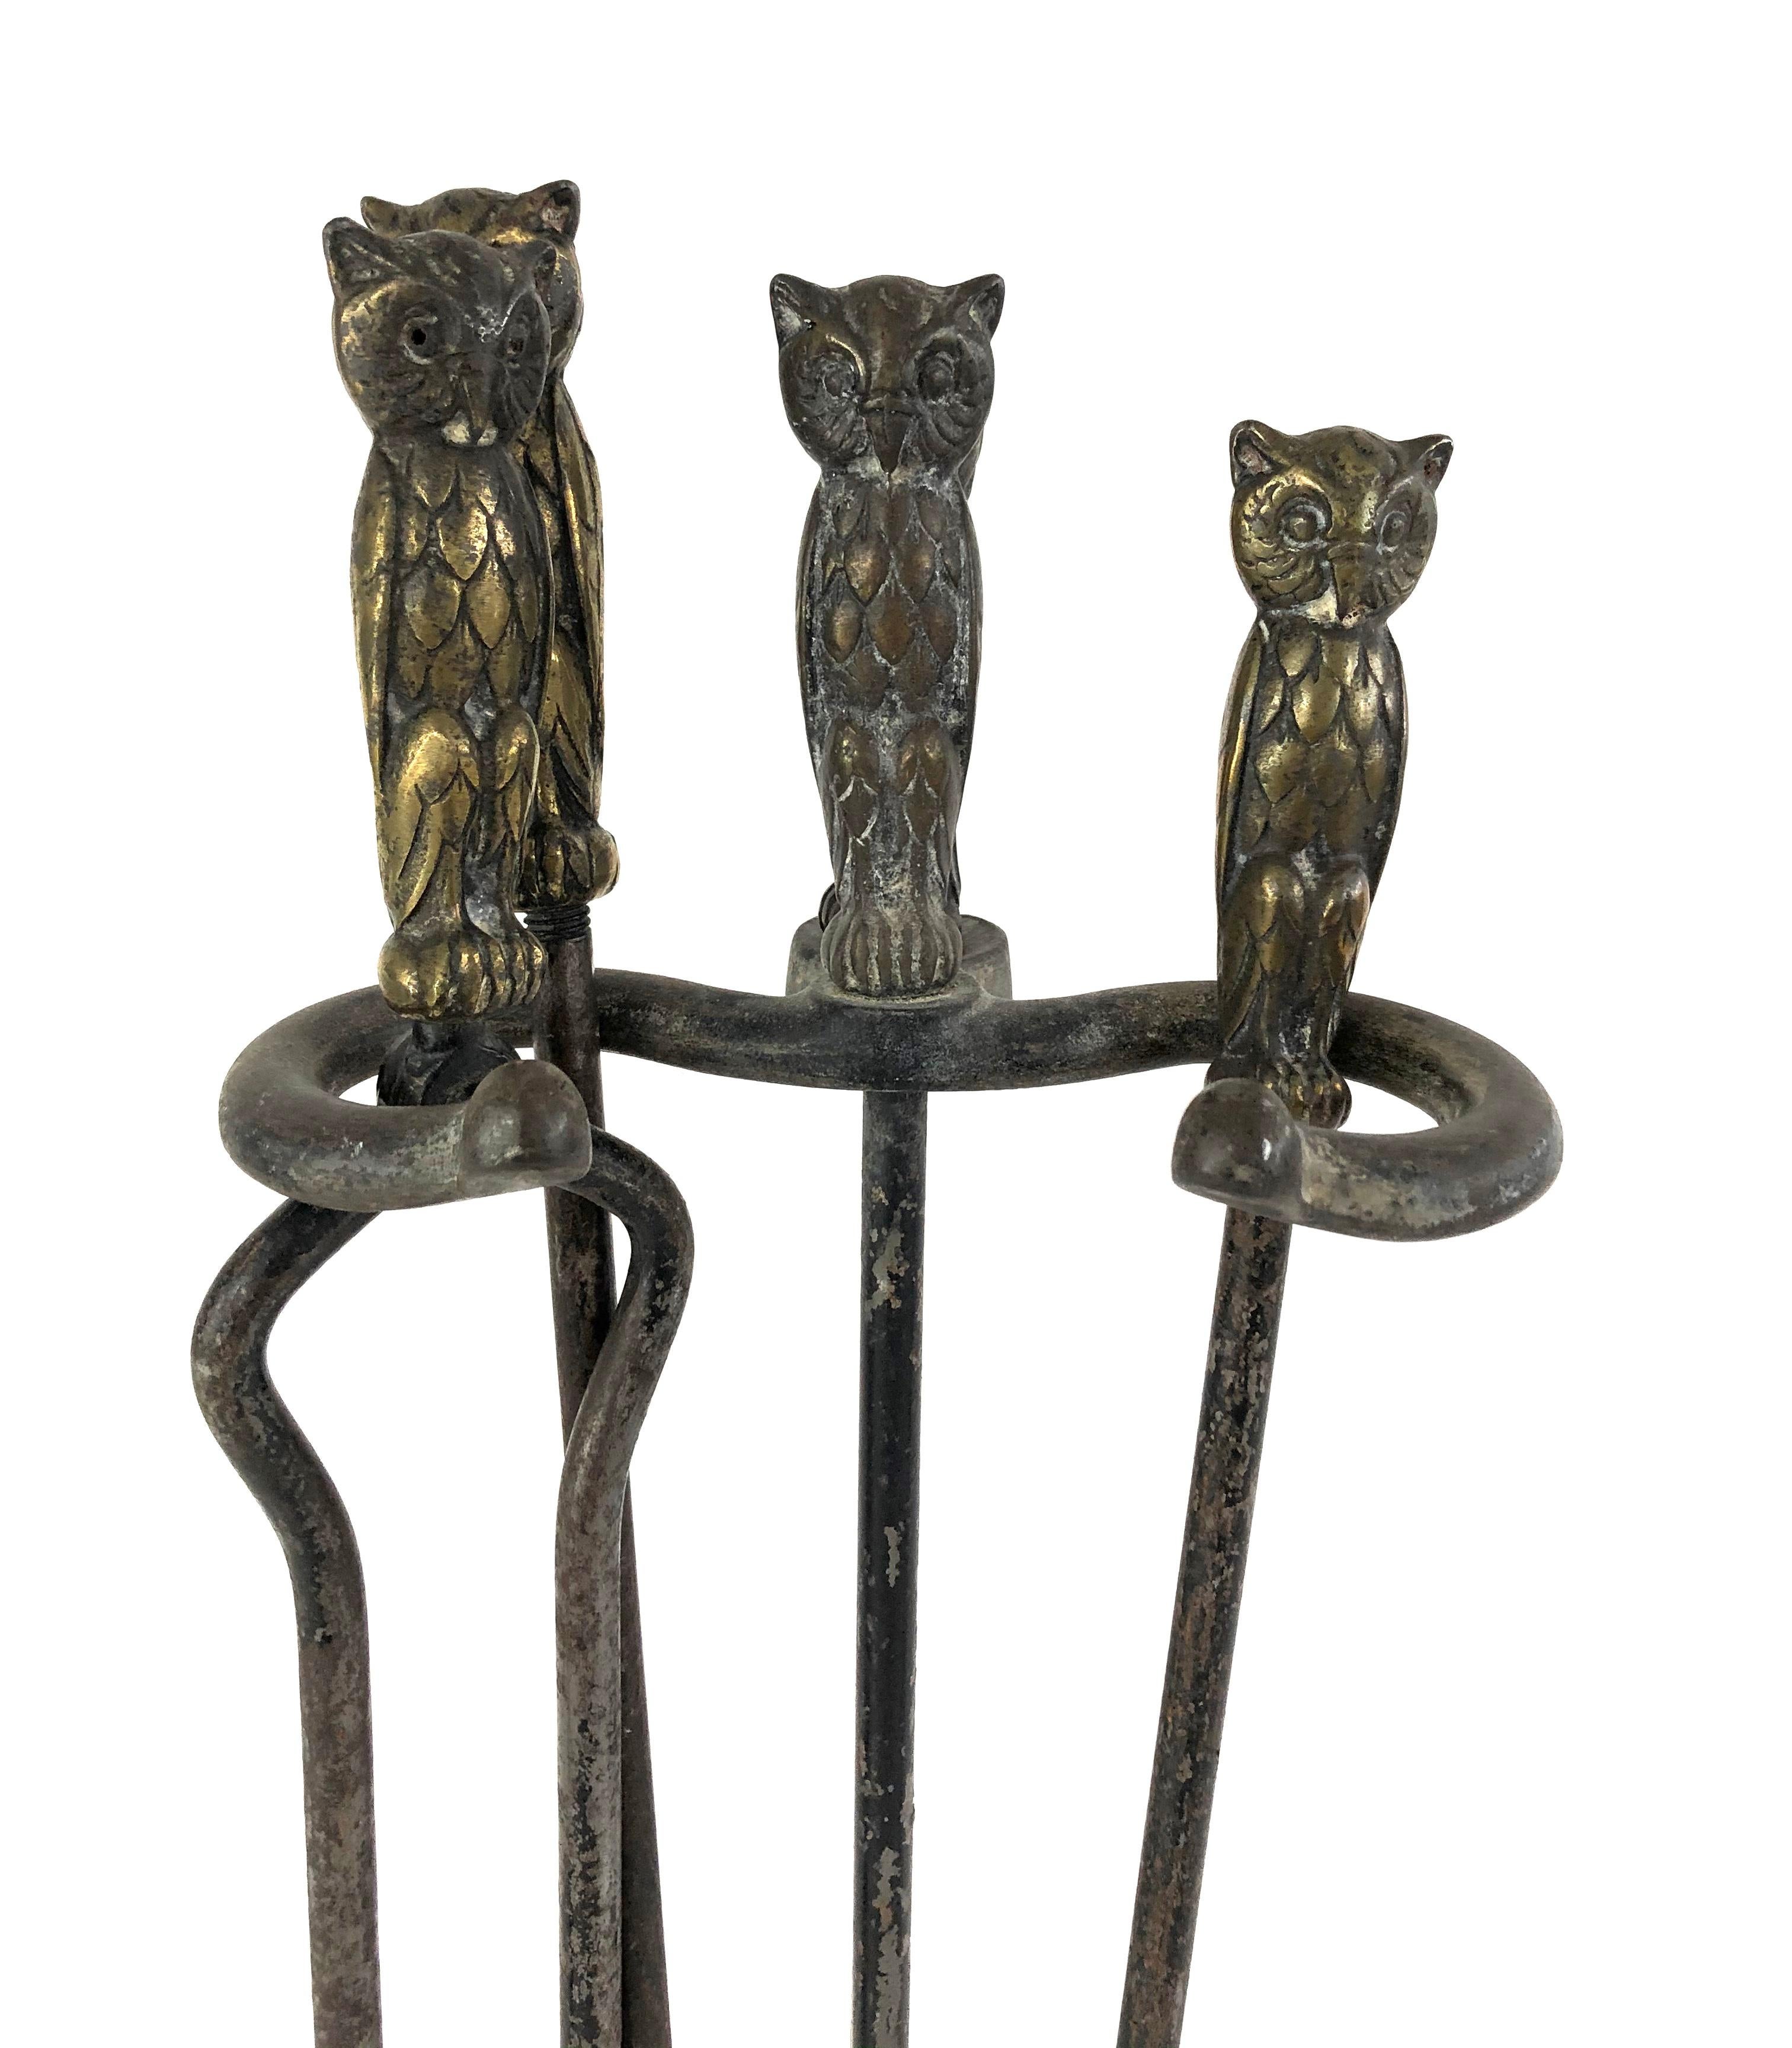 A set of brass and cast iron fireplace tools, each with a well model figure of a brass owl as its handle, comprising tongs, a poker, broom, and shovel on a stand. Solid and well made with good patina.

Dimensions:
Overall height 27.5